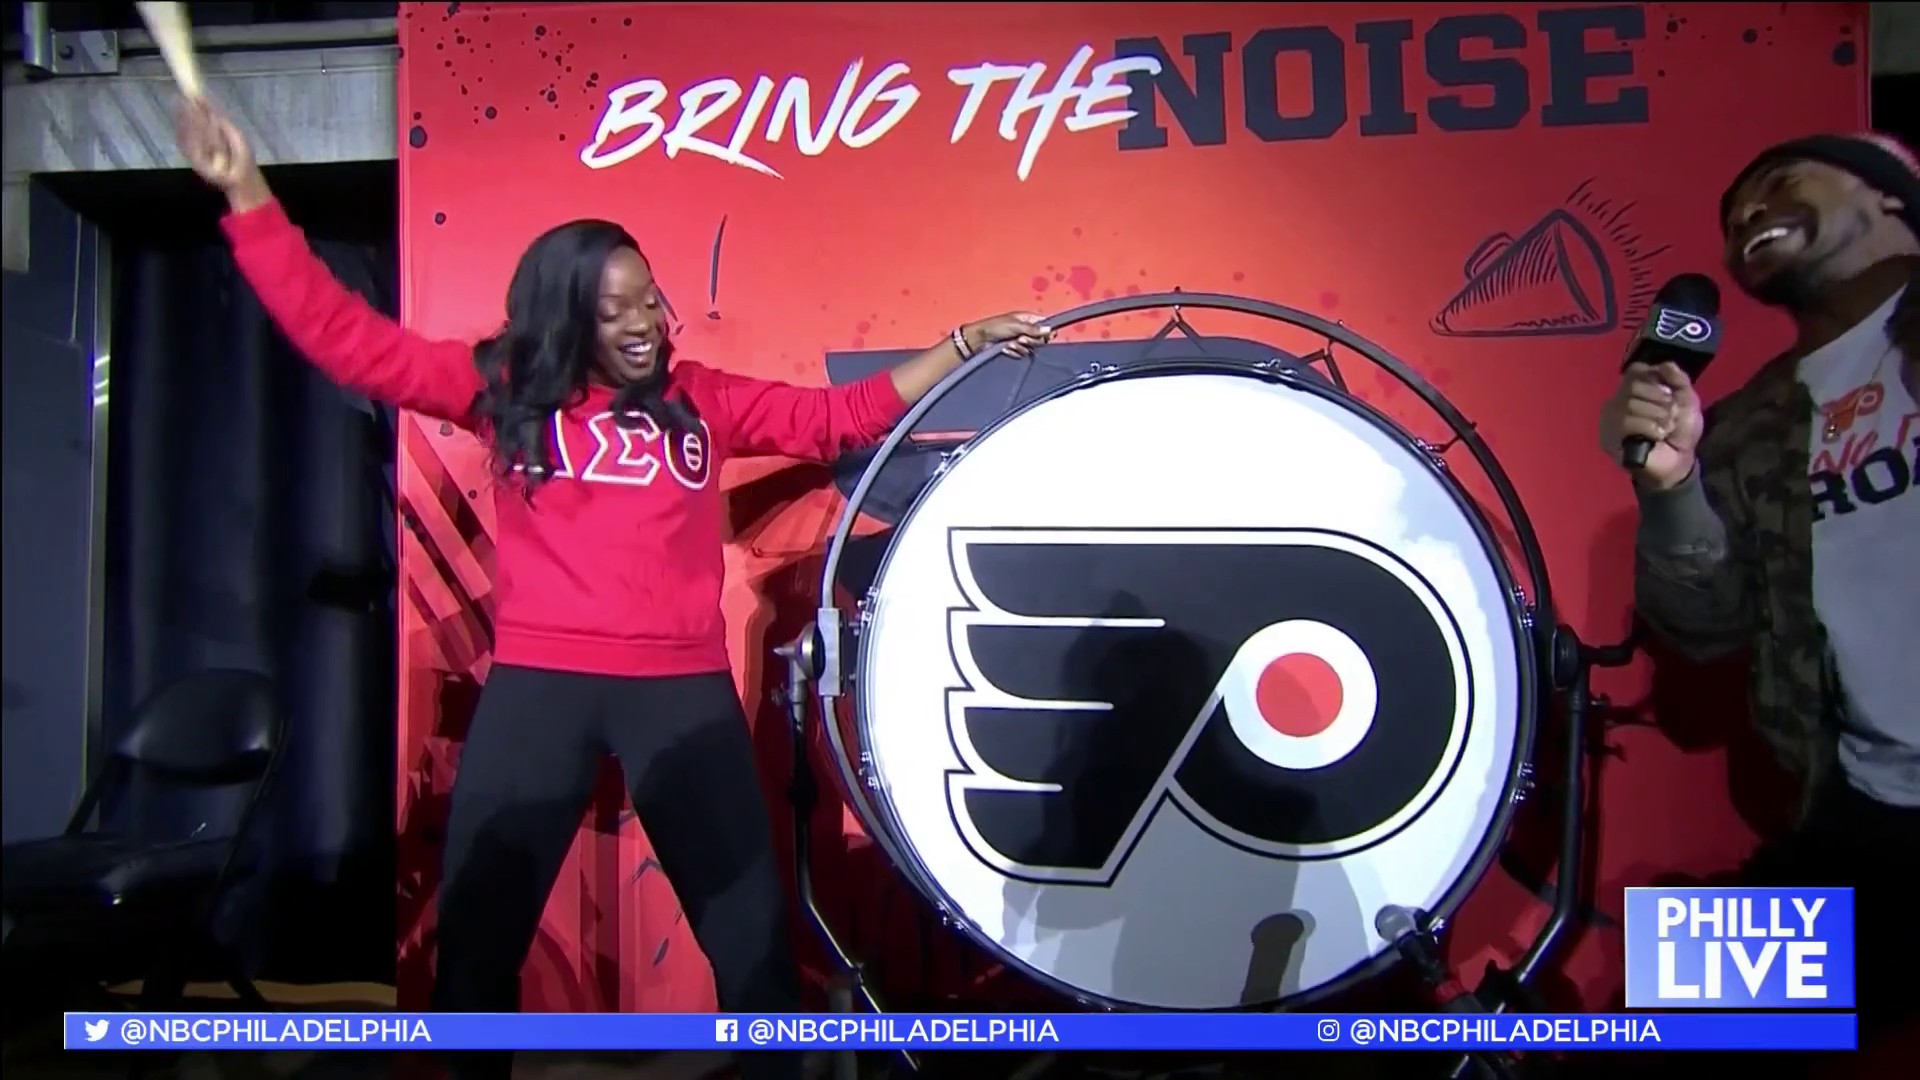 Phillys Lives Aunyea Lachelle Brings the Noise Before Flyers Game